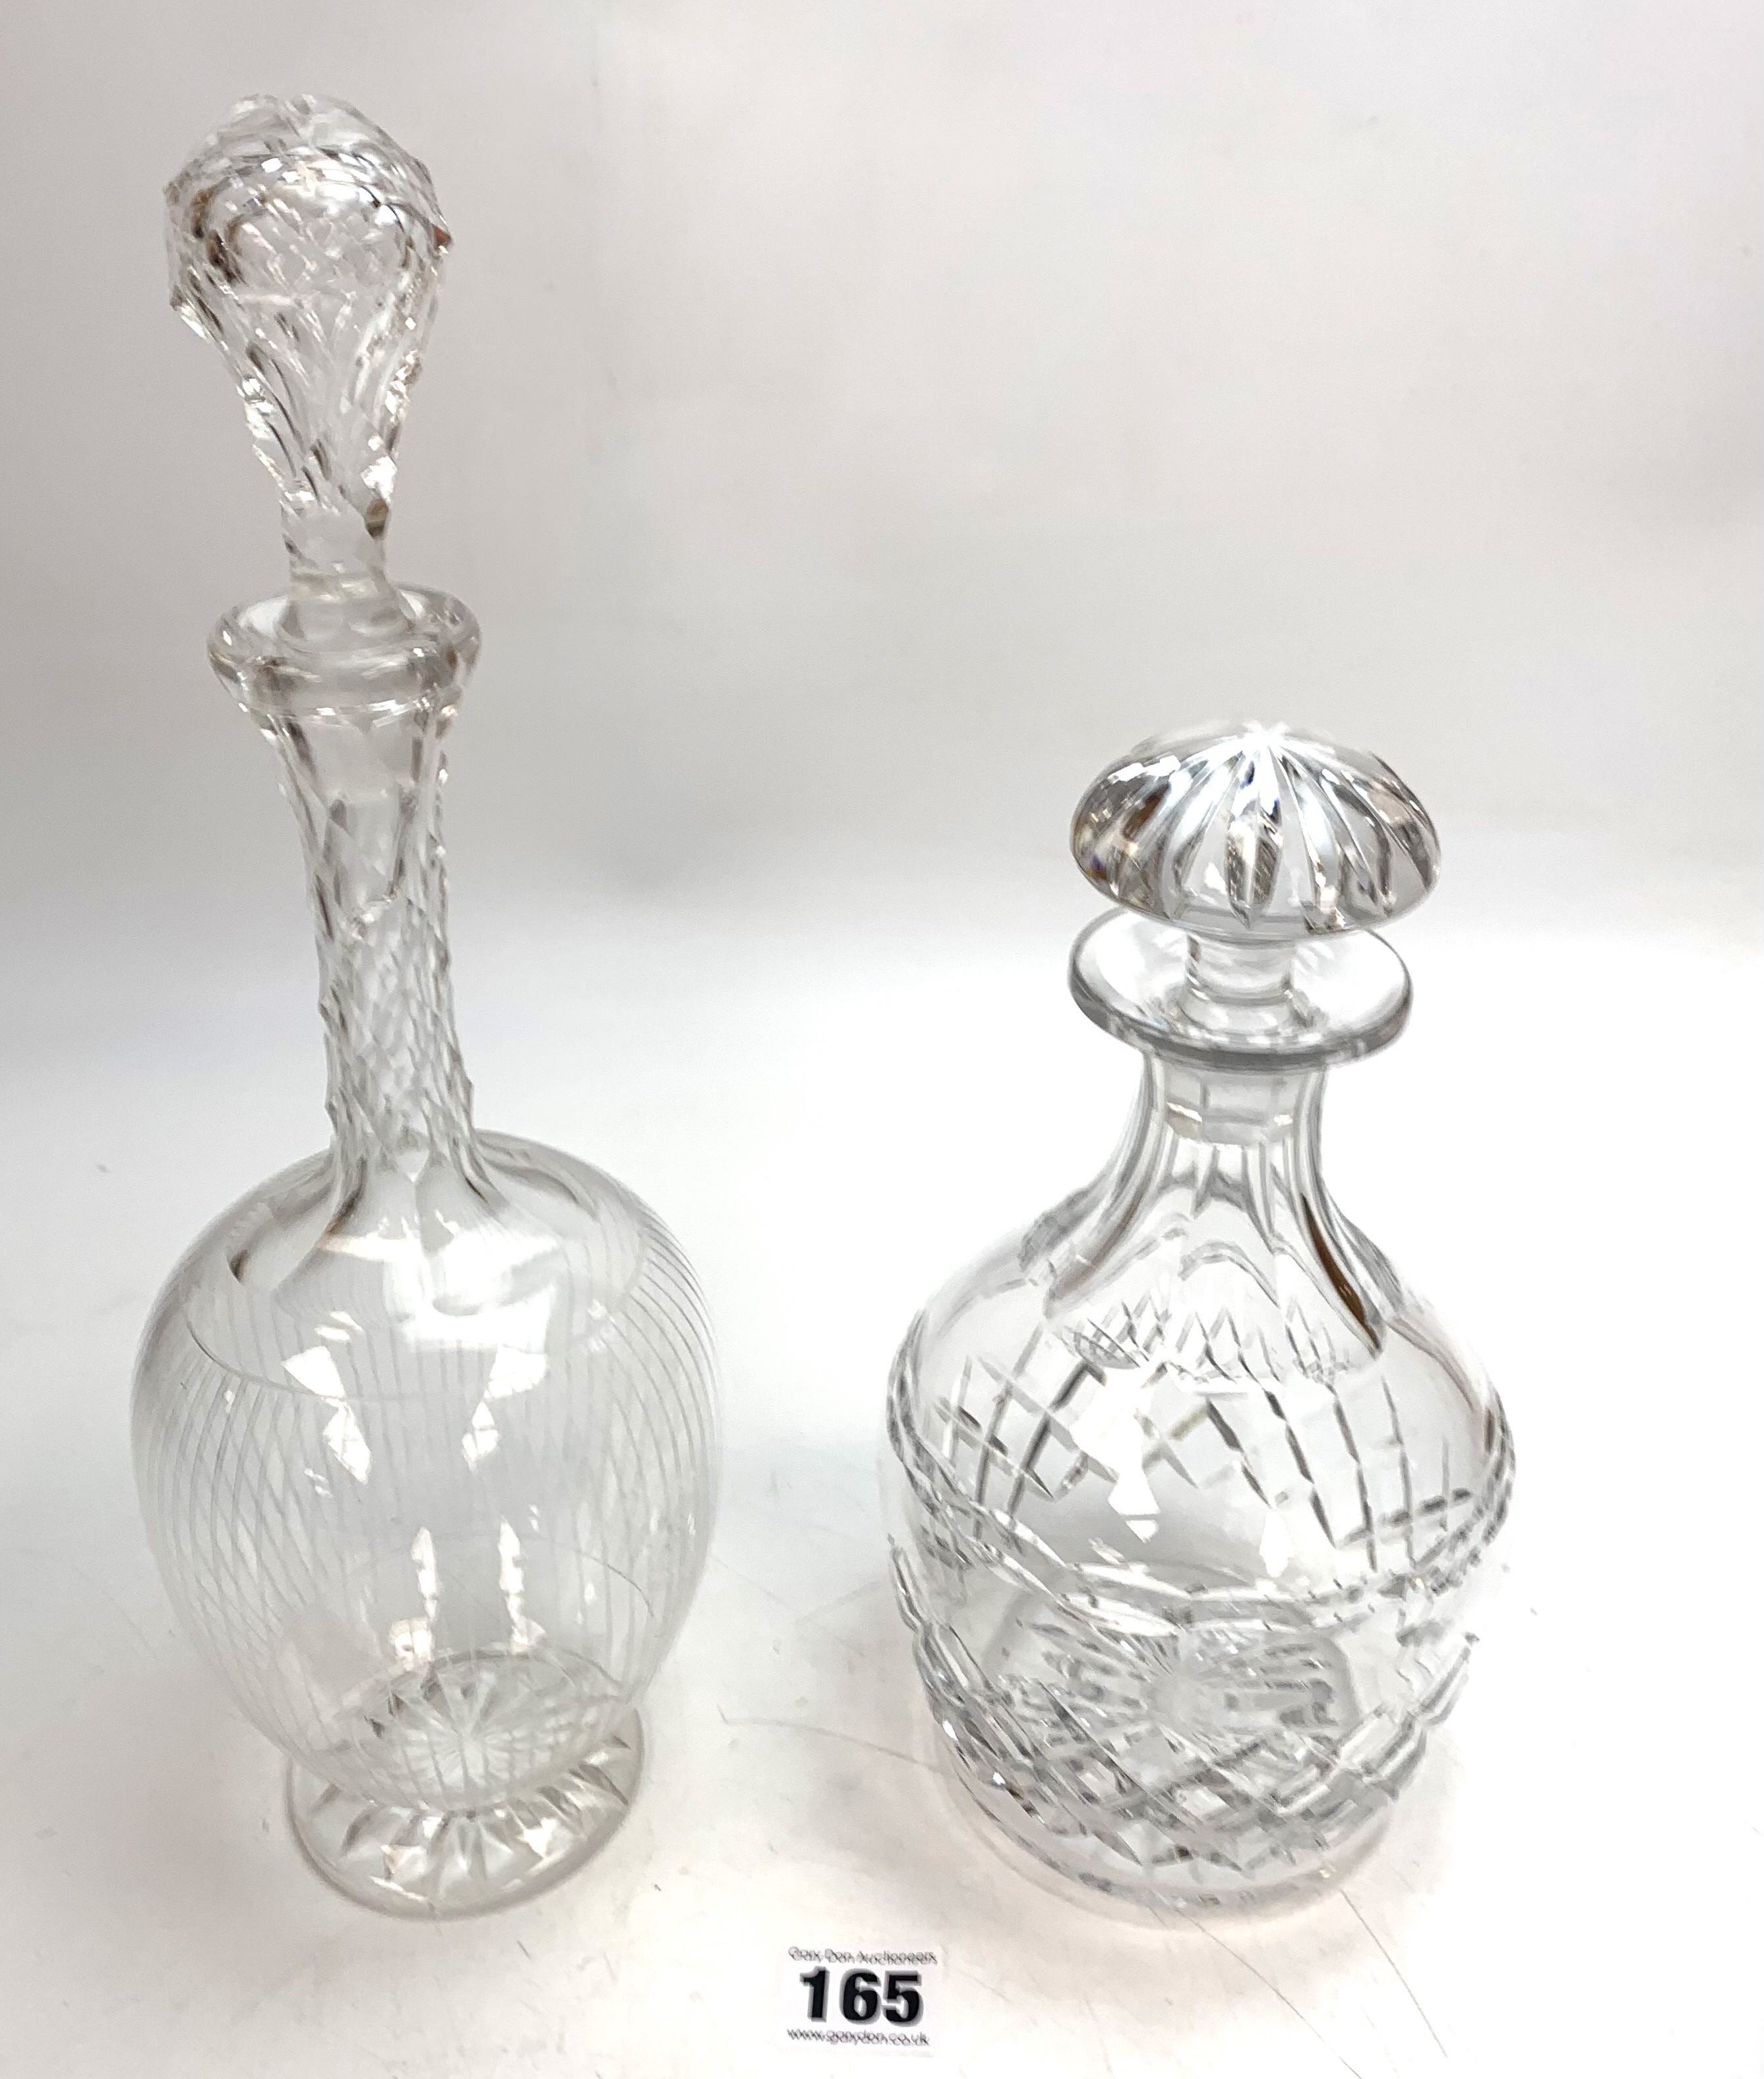 2 cut glass decanters - Image 2 of 4